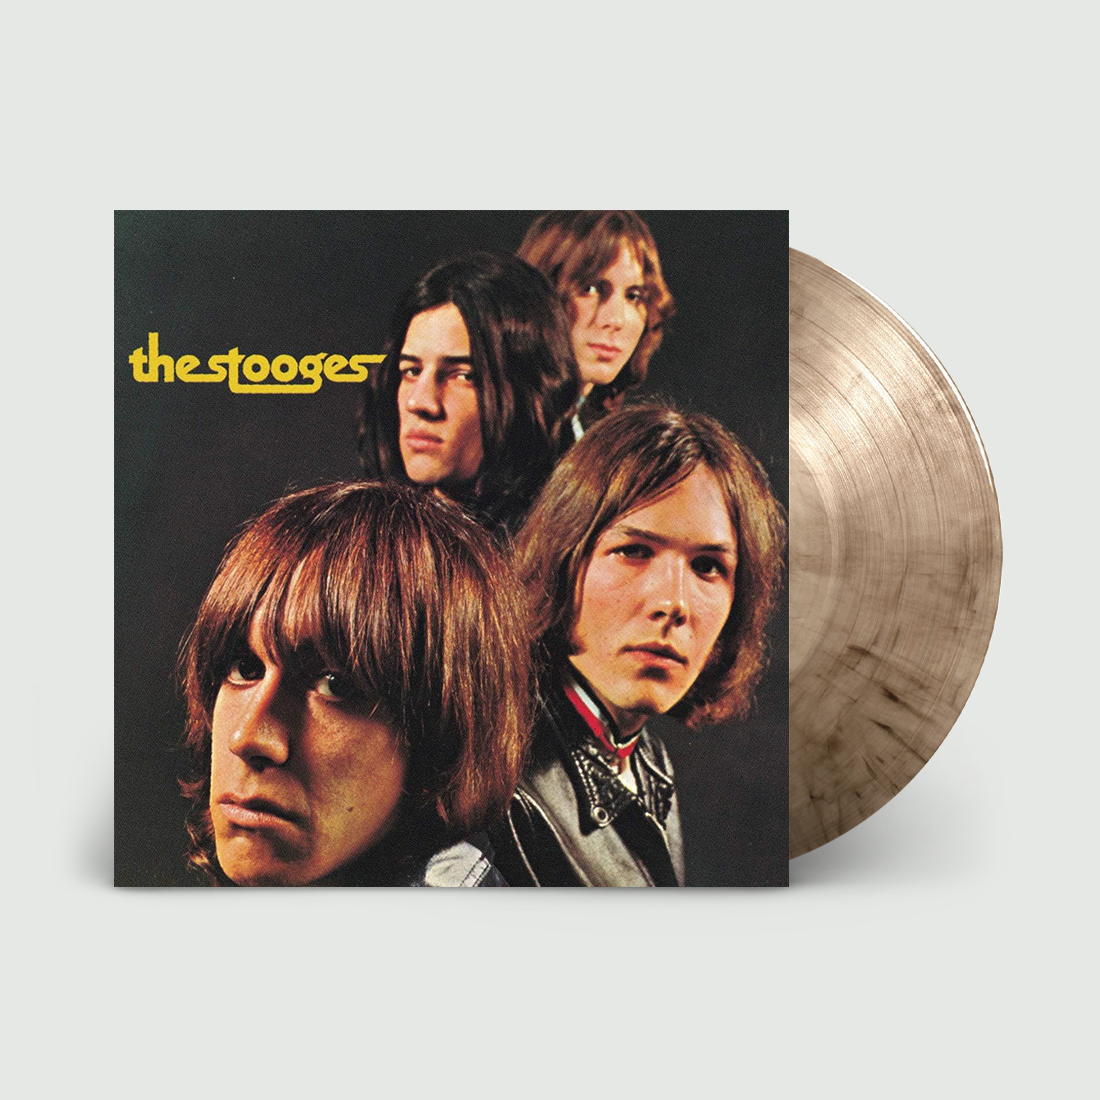 The Stooges - The Stooges: Clear and Black Swirl Vinyl LP